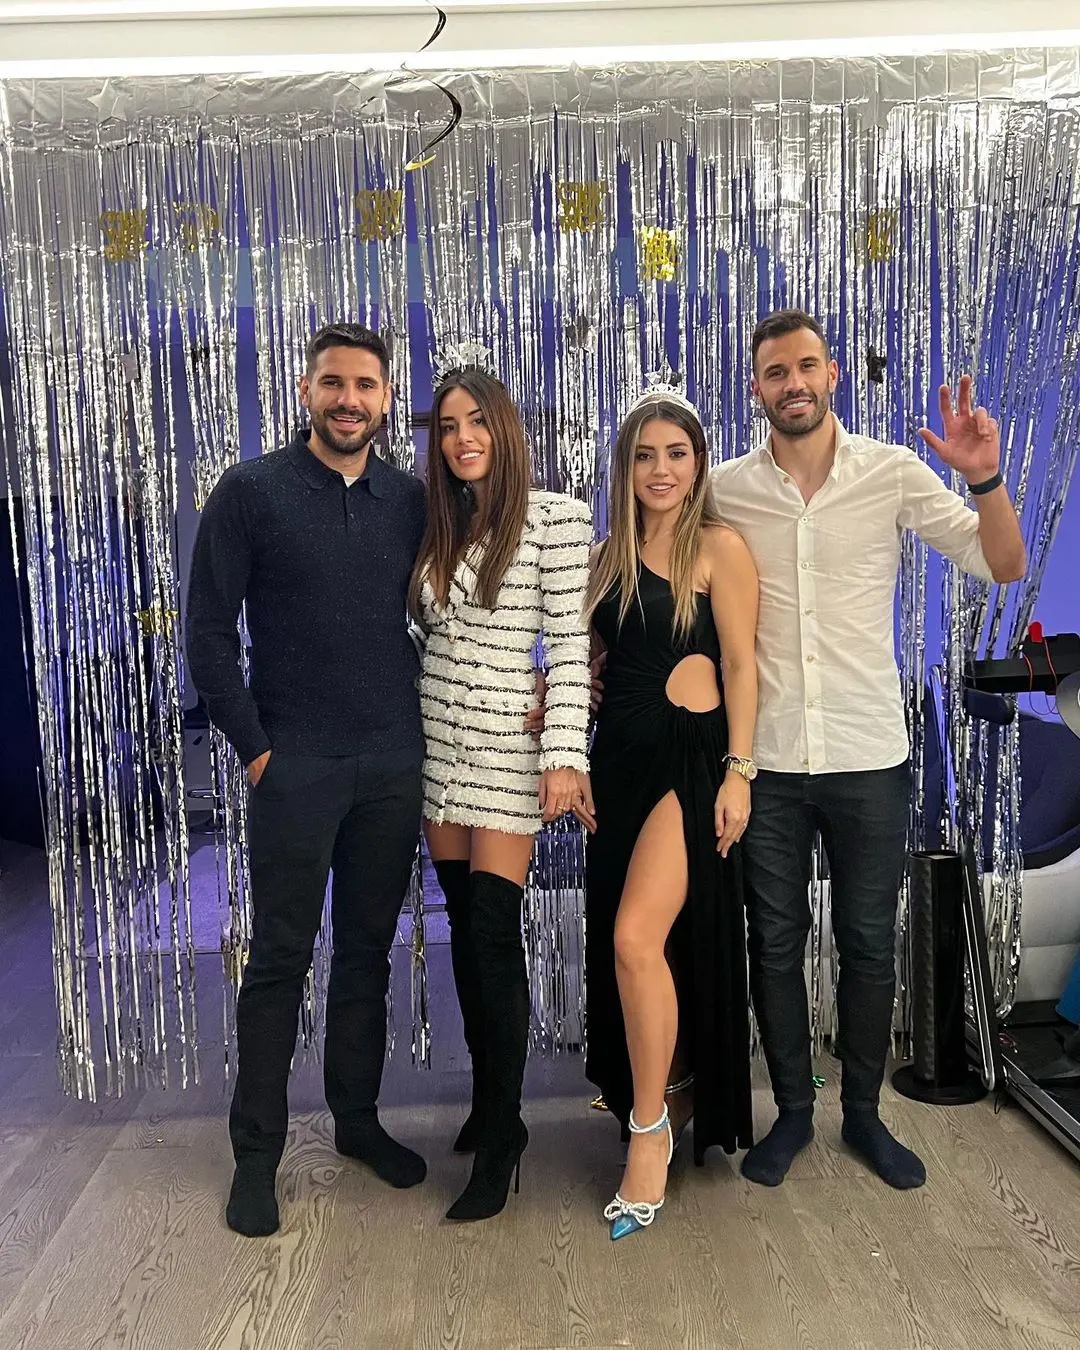 MItrovic family celebrated the new year with Milivojevic family of his national teammate Luka Milivojevic on January 1st